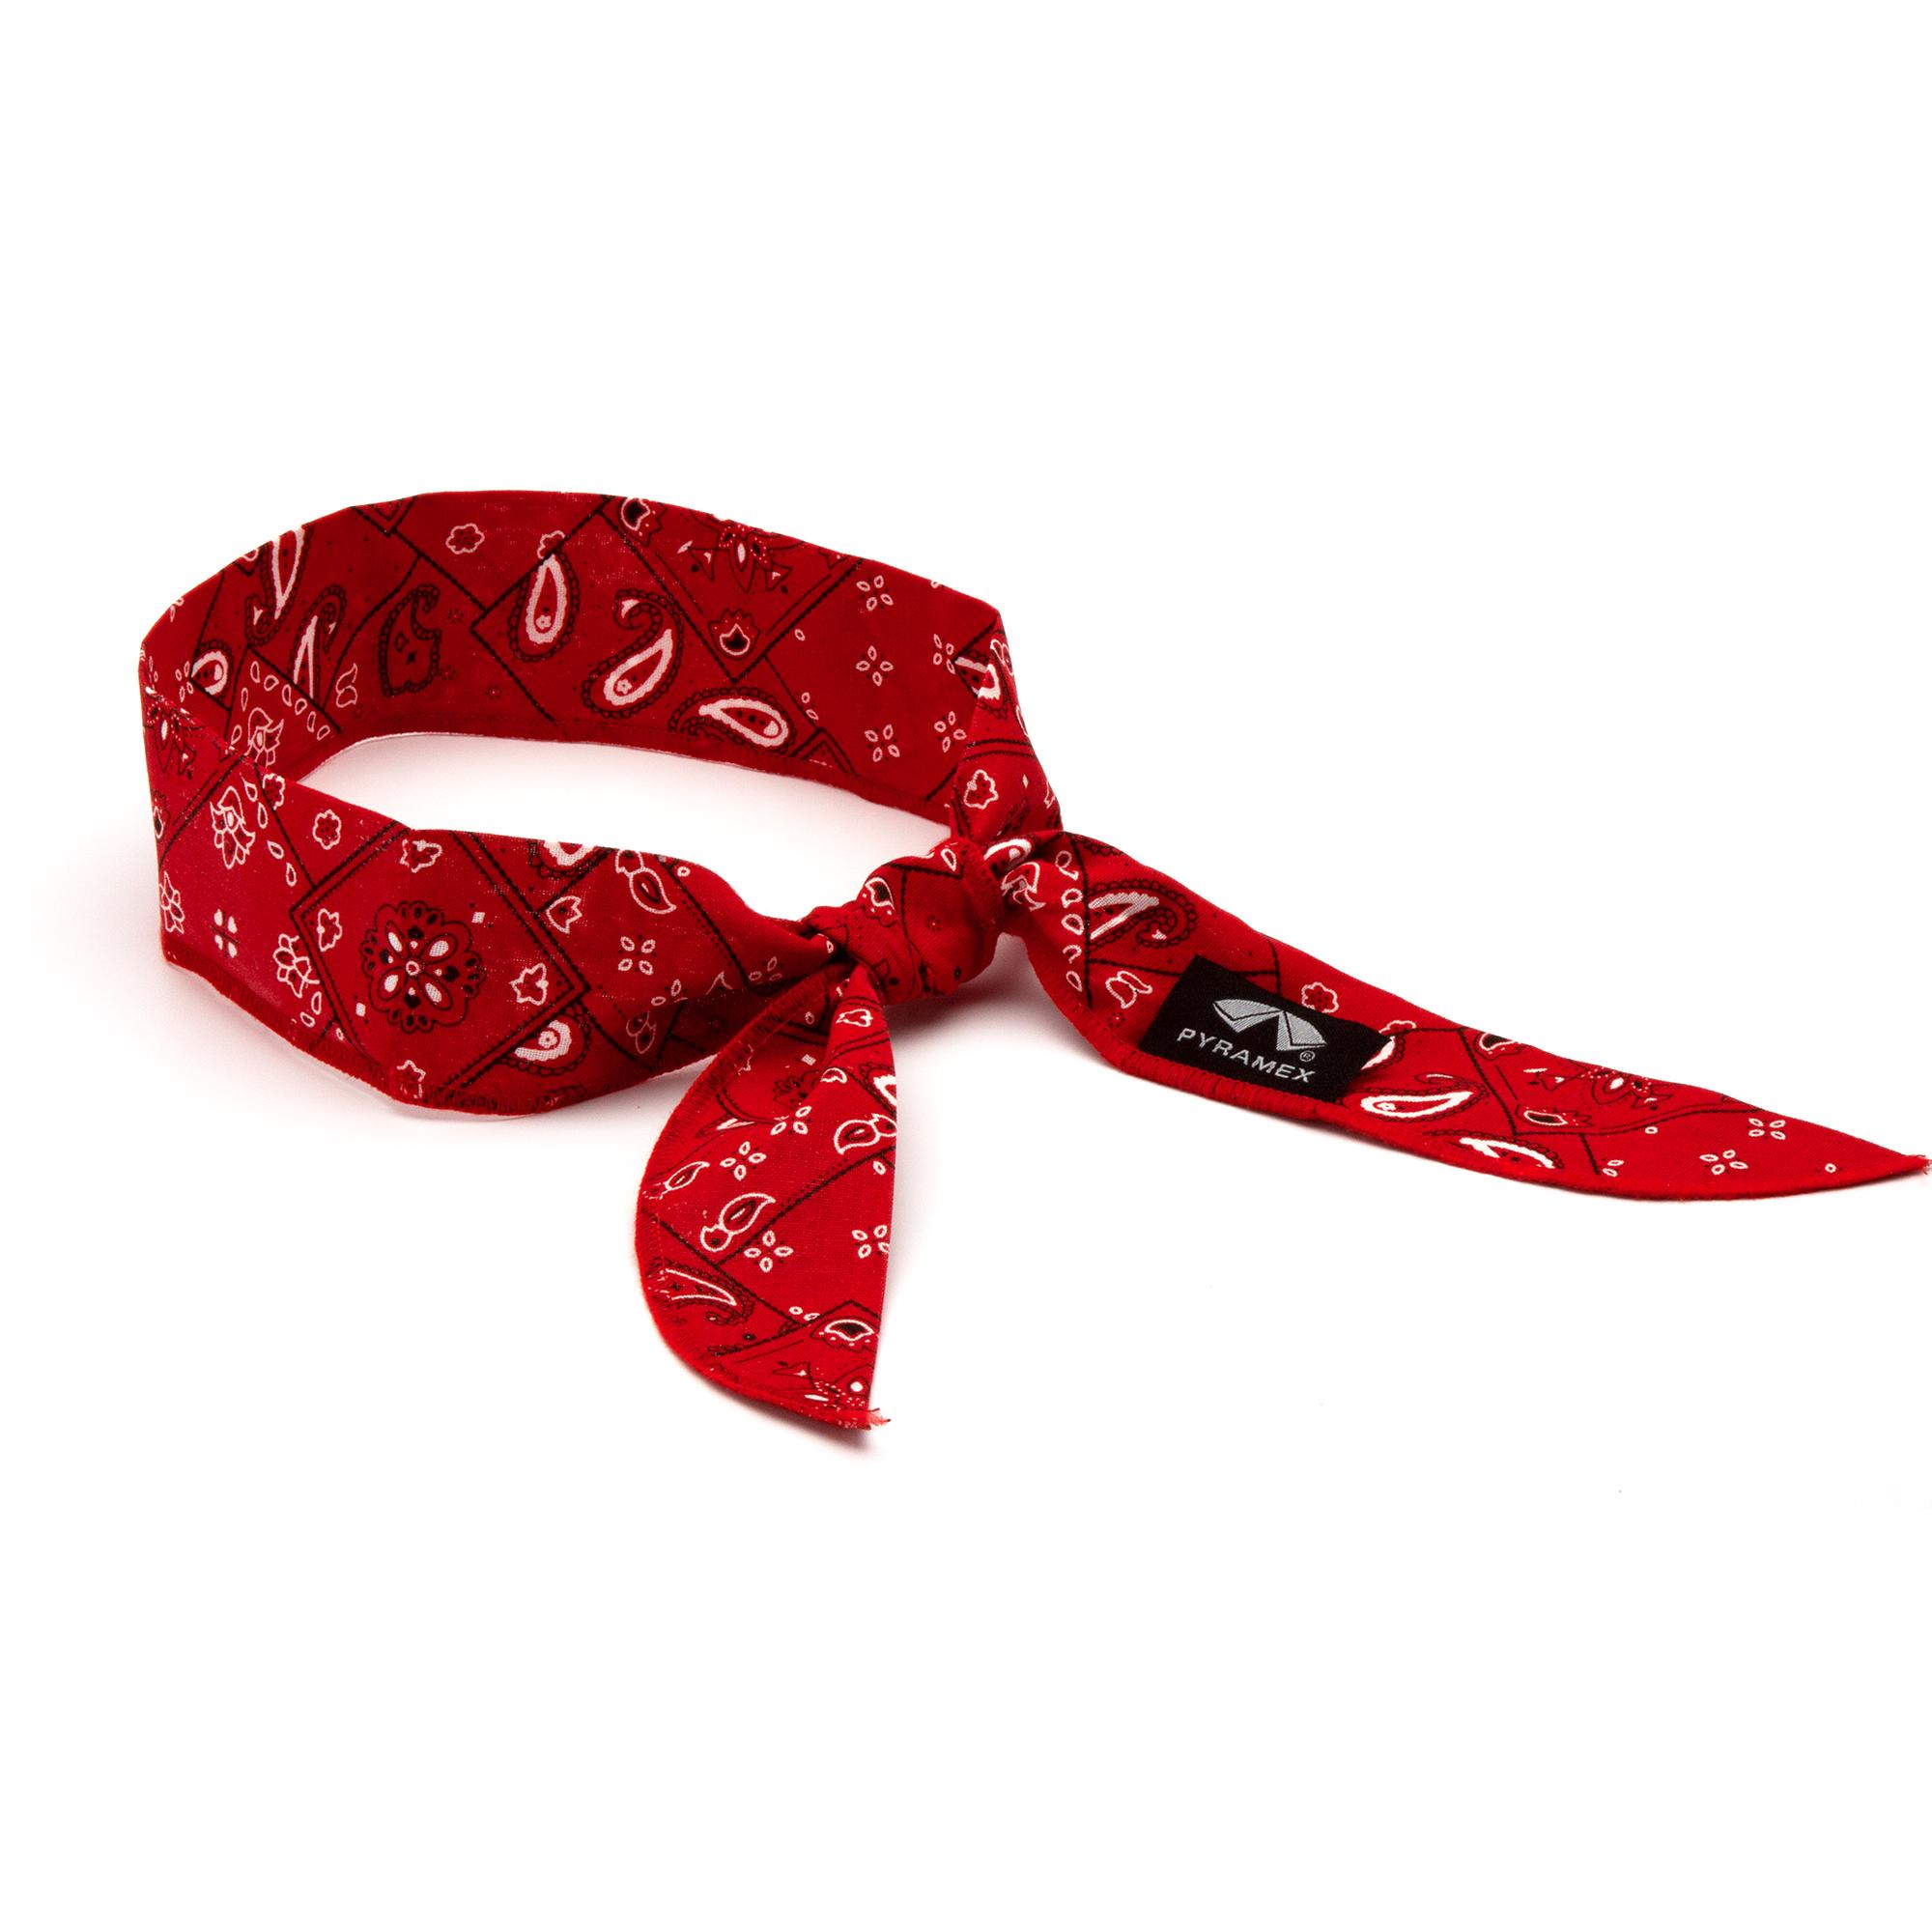 Pyramex CNB12PKR Cooling Beaded Bandana - Red Paisley | Full Source